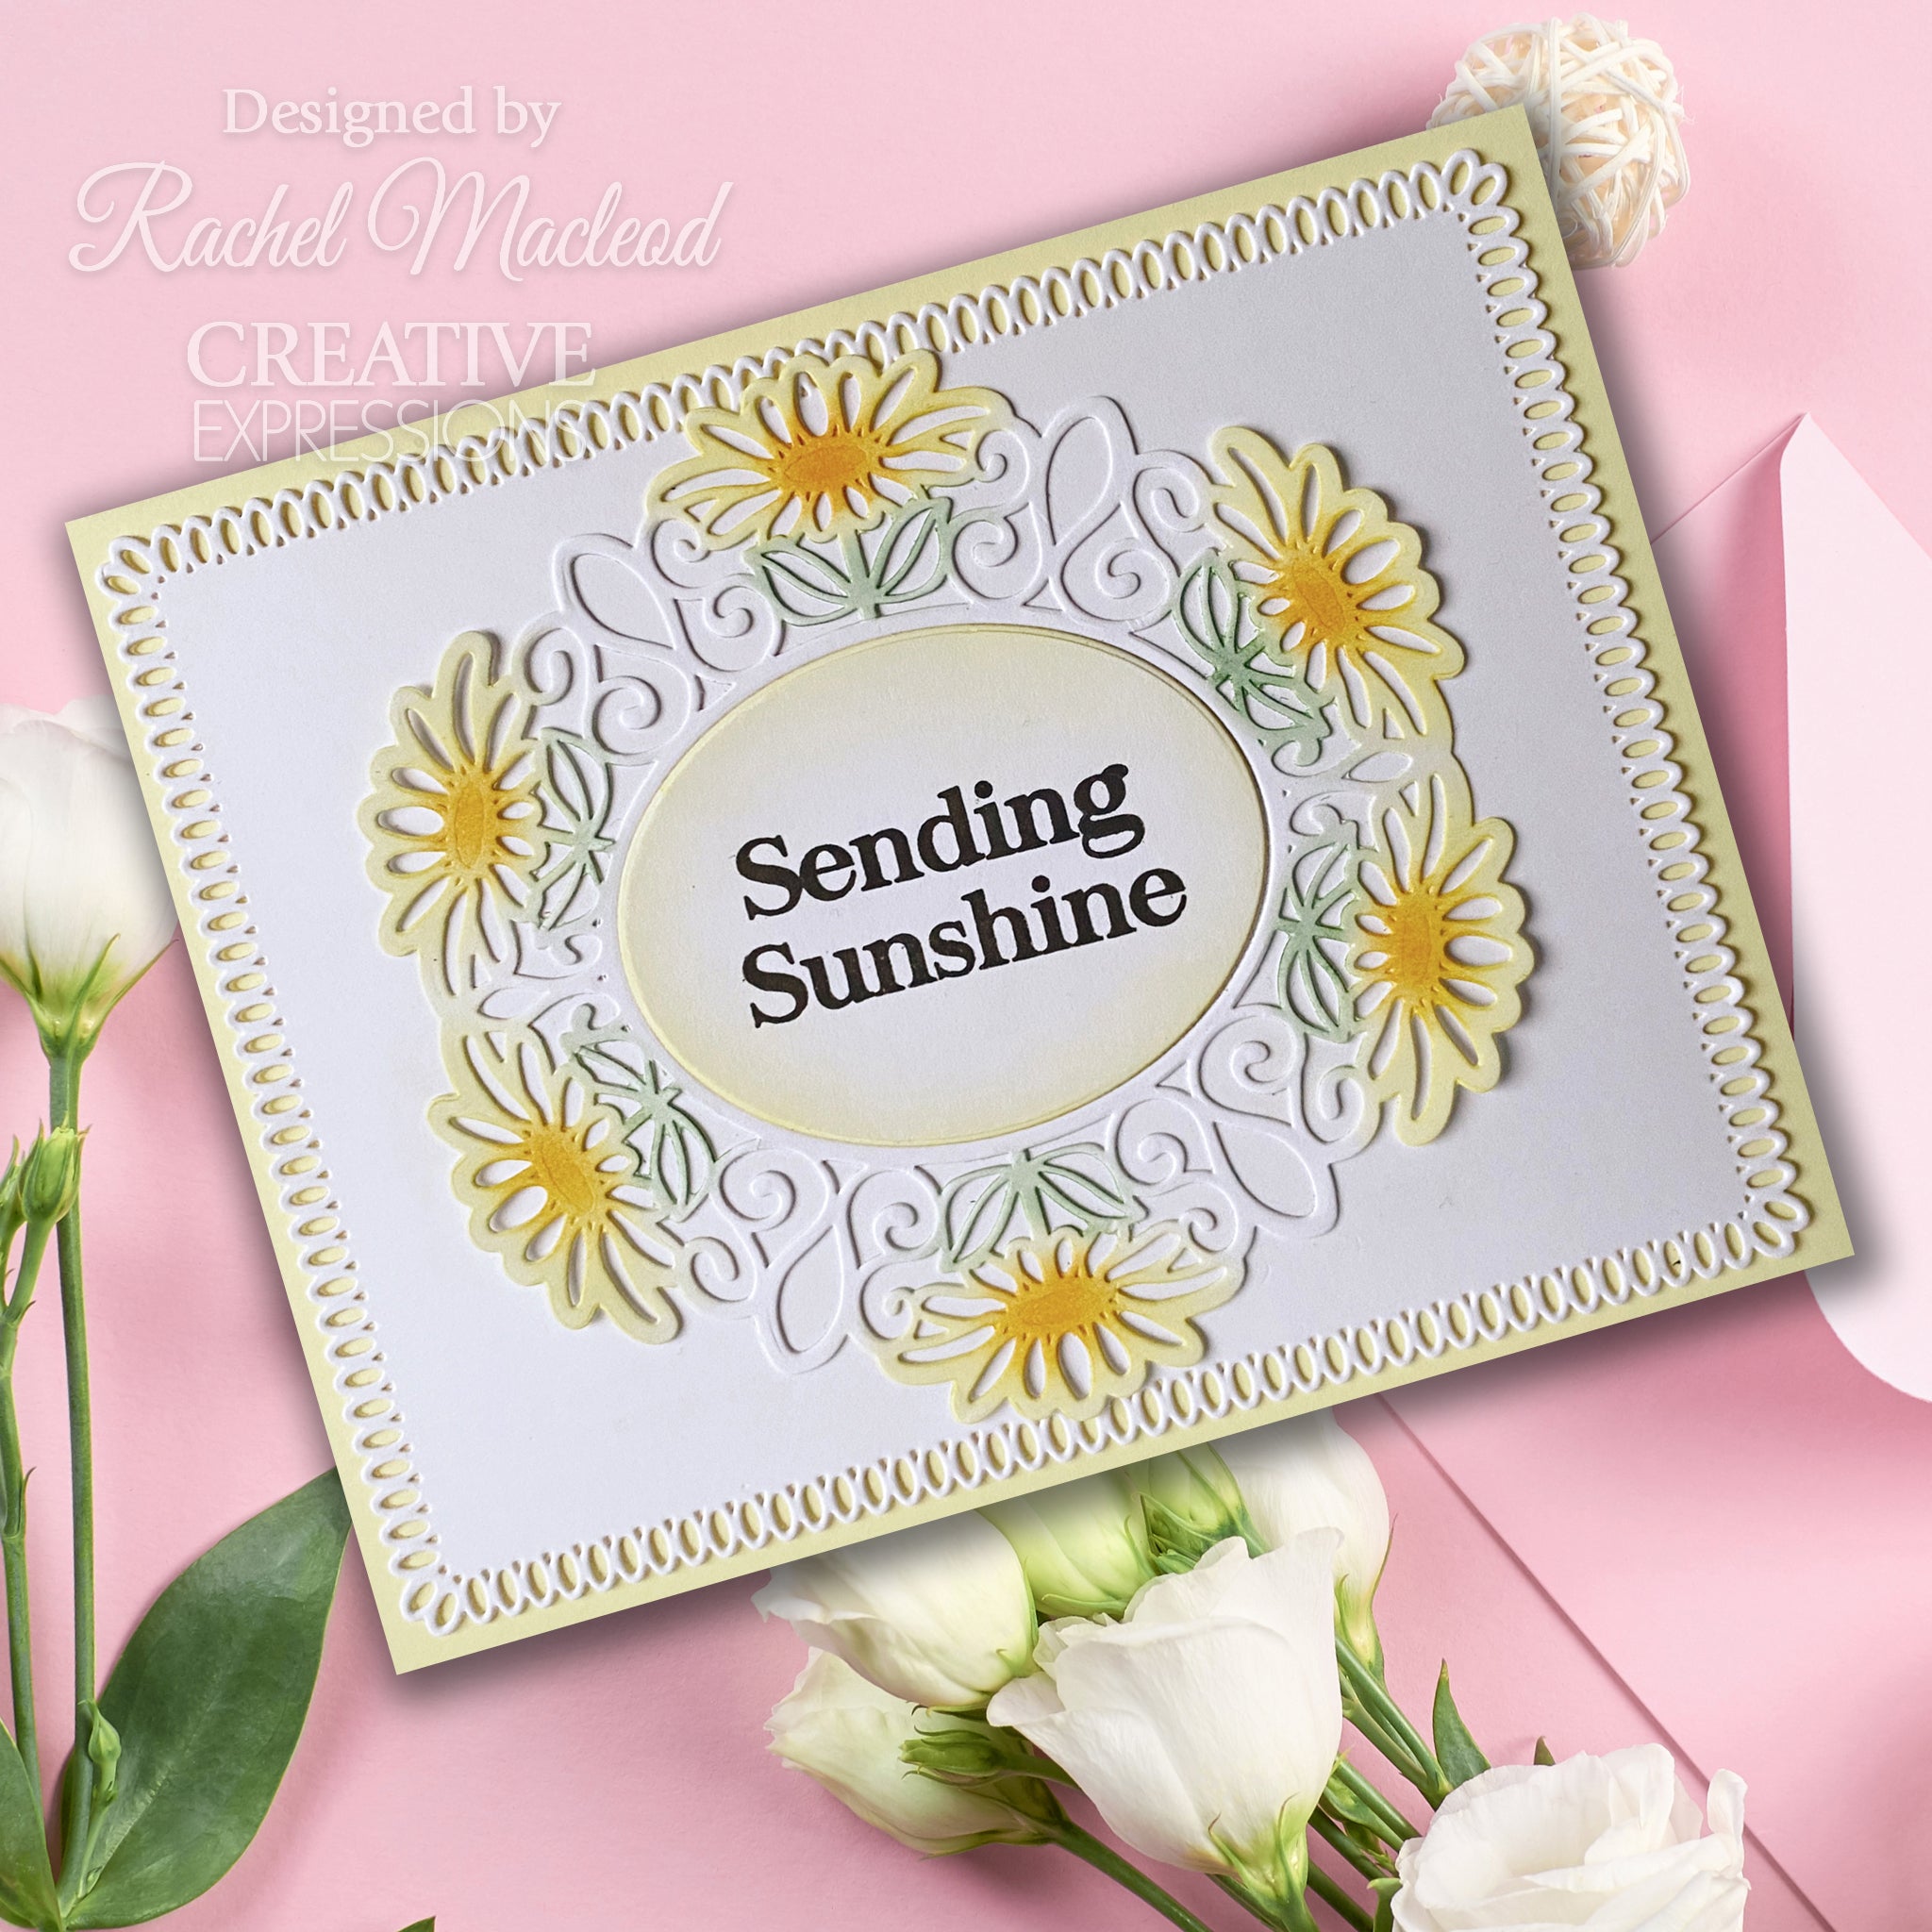 Creative Expressions Sue Wilson Sending Sunshine 6 in x 8 in Clear Stamp Set